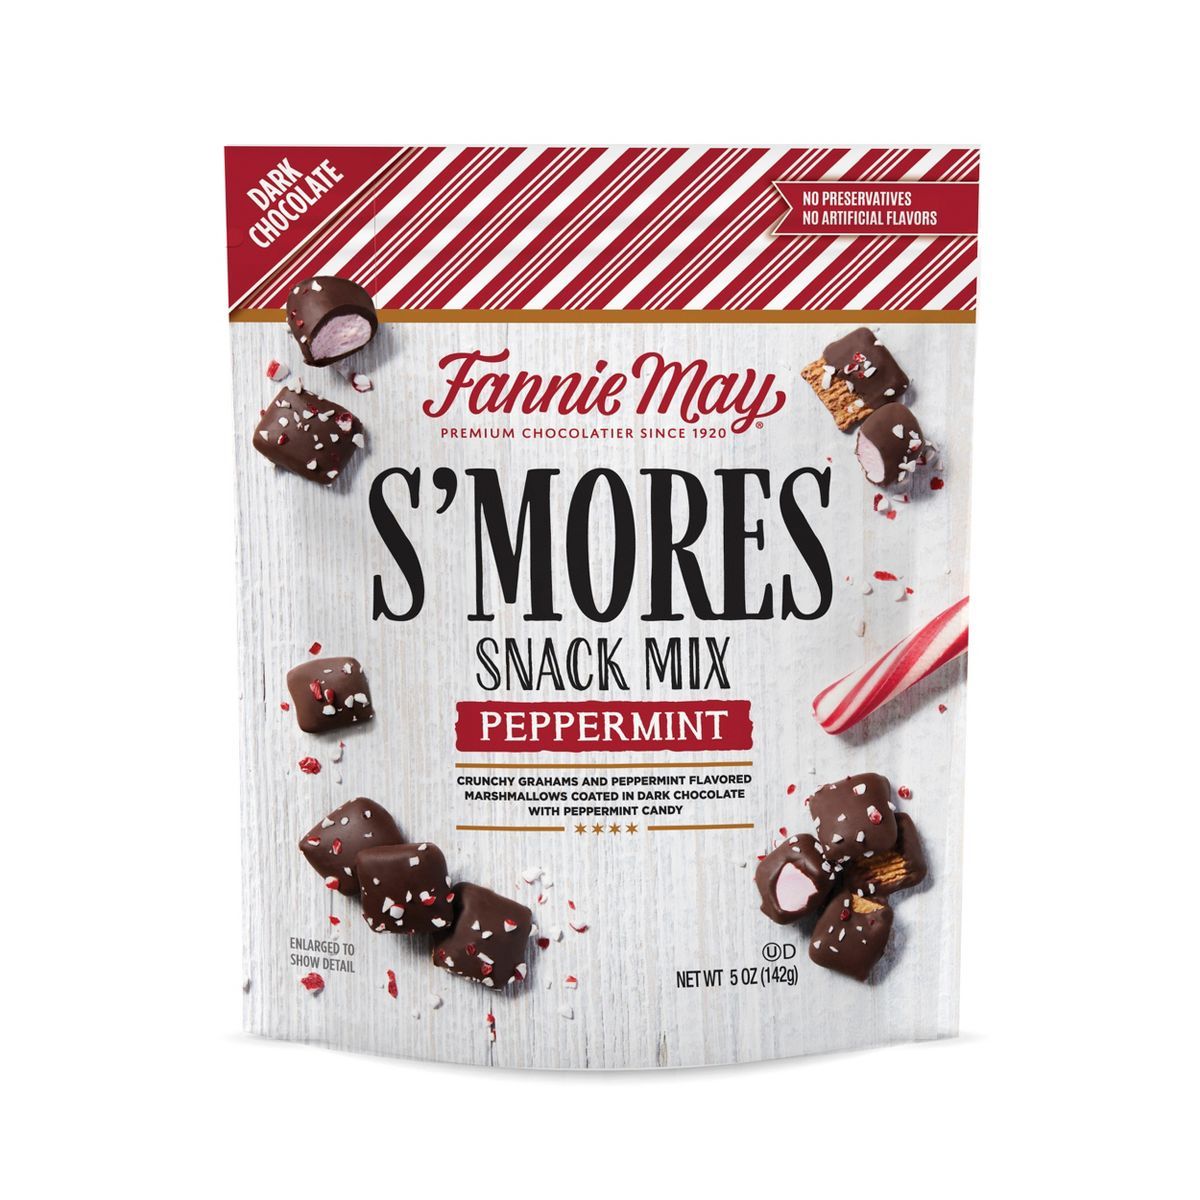 Fanny May Peppermint S'mores Snack Mix Dark Chocolate - 5oz | Target